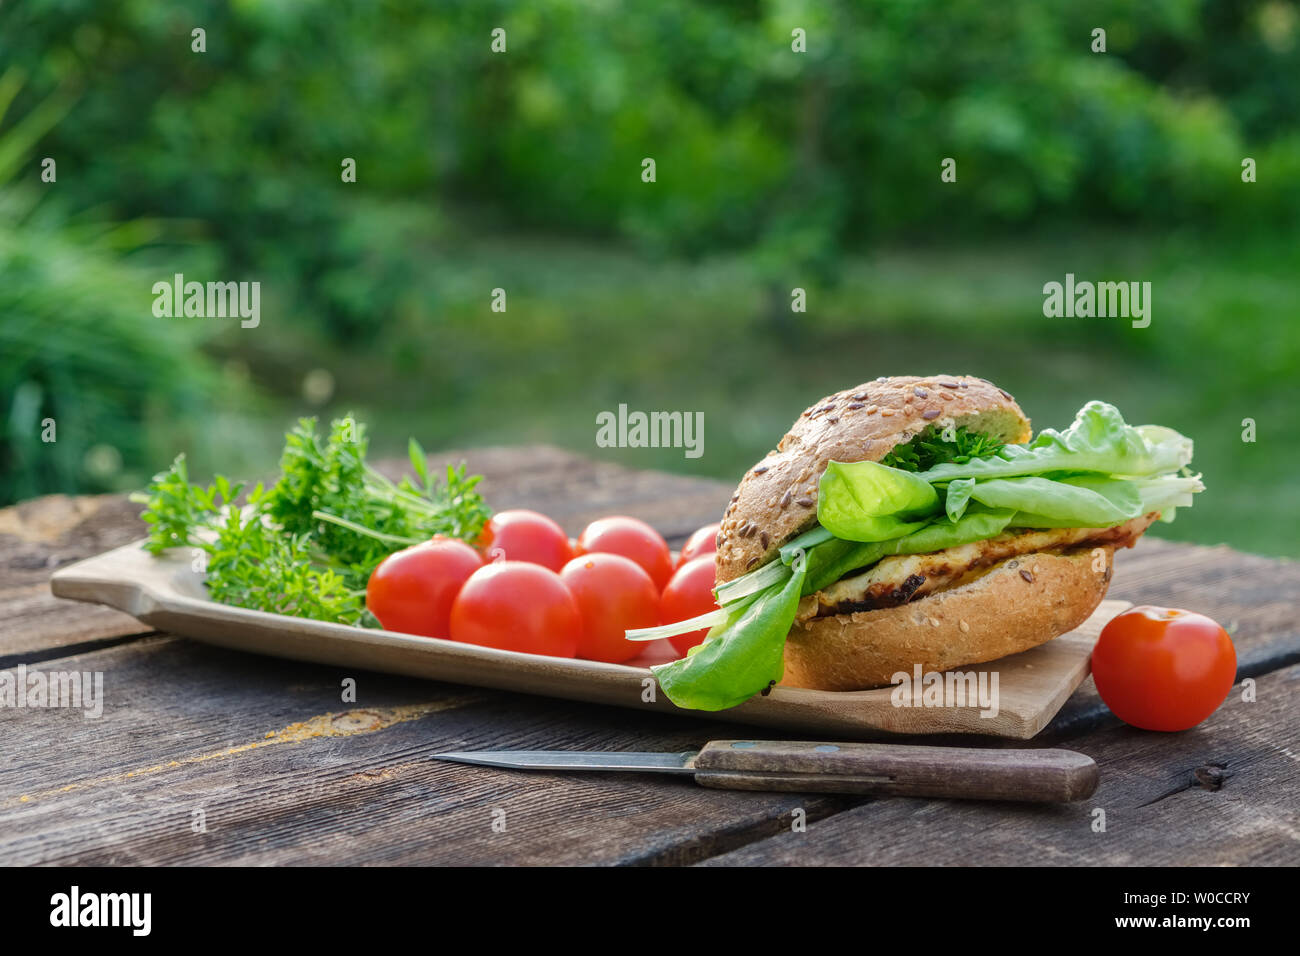 Tasty homemade burger with meat, lettuce, tomatoes, sesame bun on picnic table in garden outdoors. Stock Photo